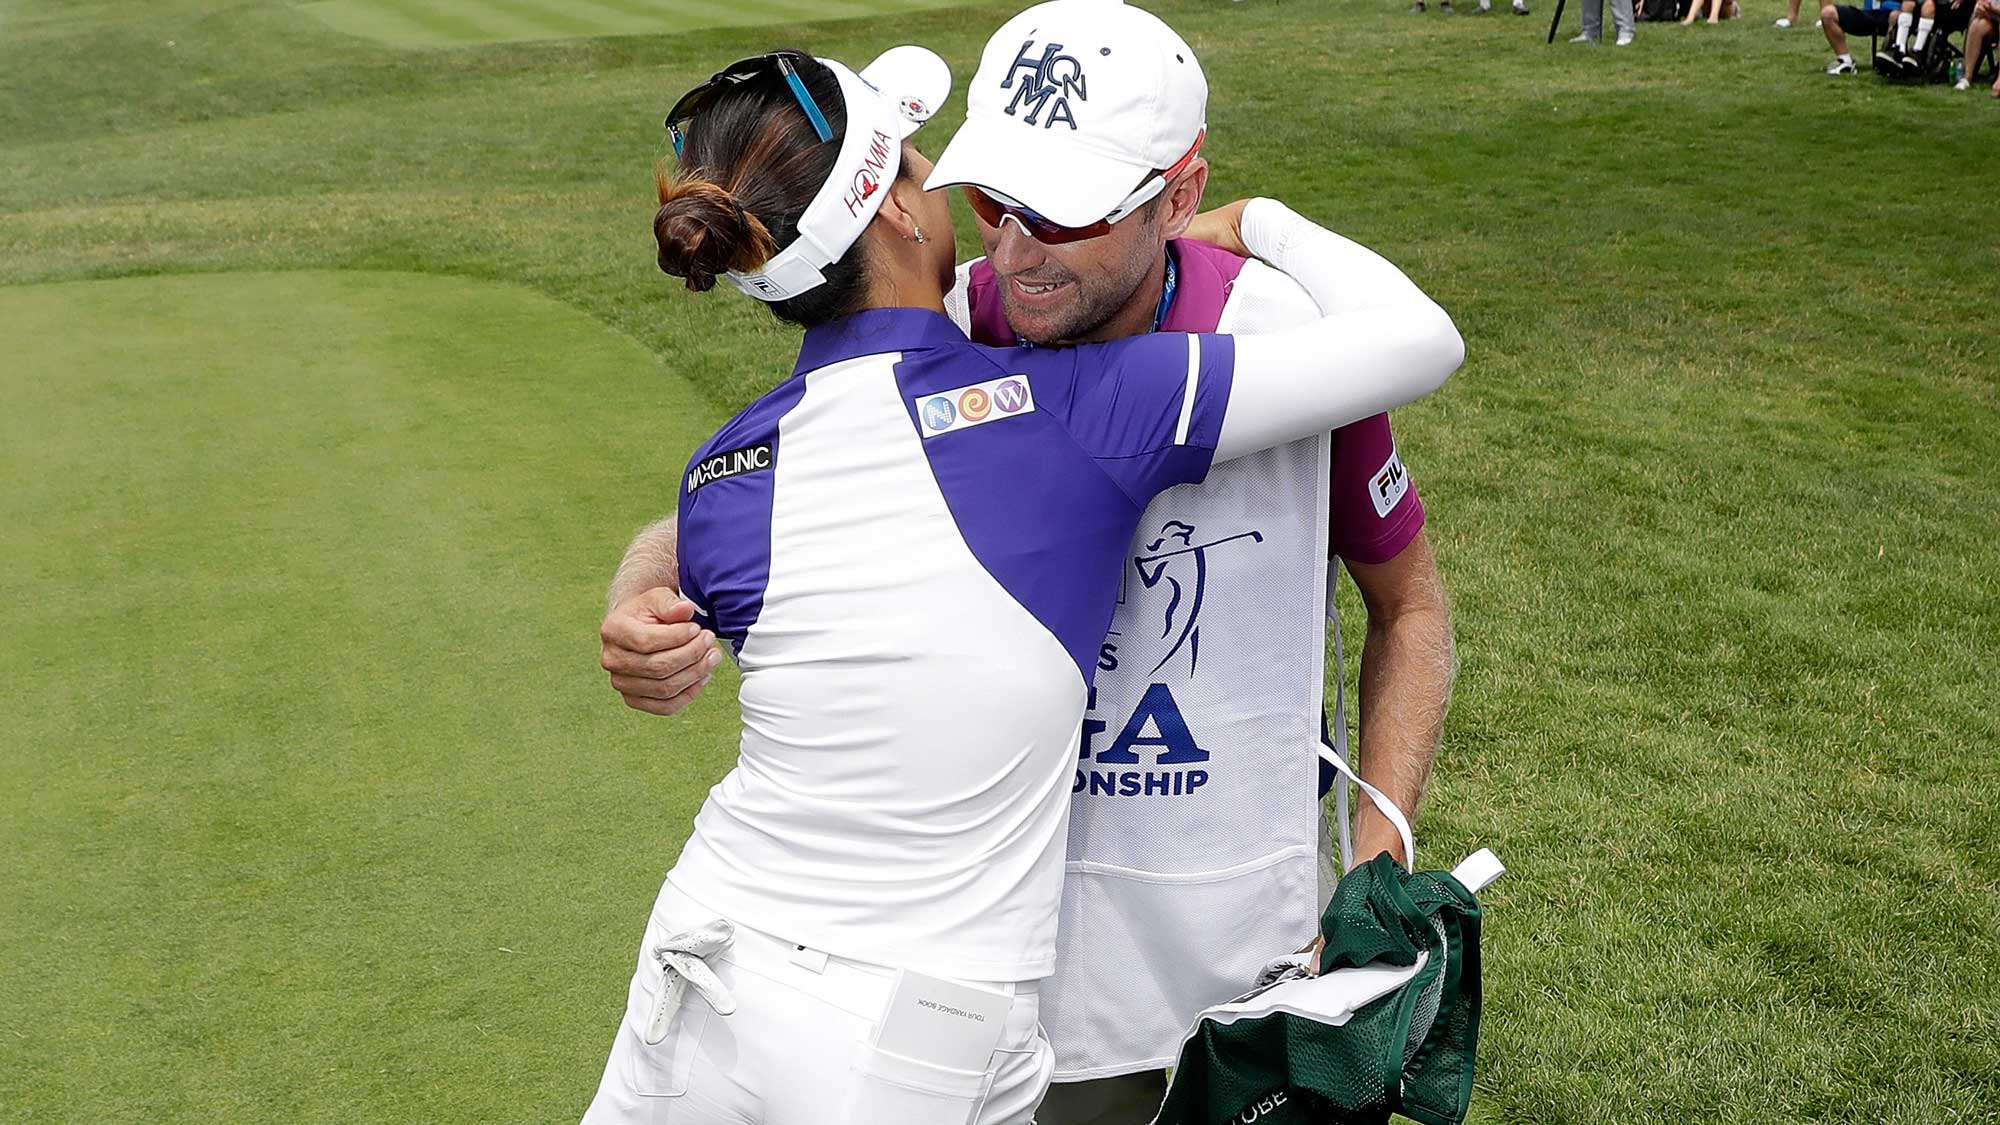 So Yeon Ryu of South Korea hugs her caddie, Tom Watson, after giving him a caddie bib signifying her #1 world ranking during the first round of the 2017 KPMG PGA Championship